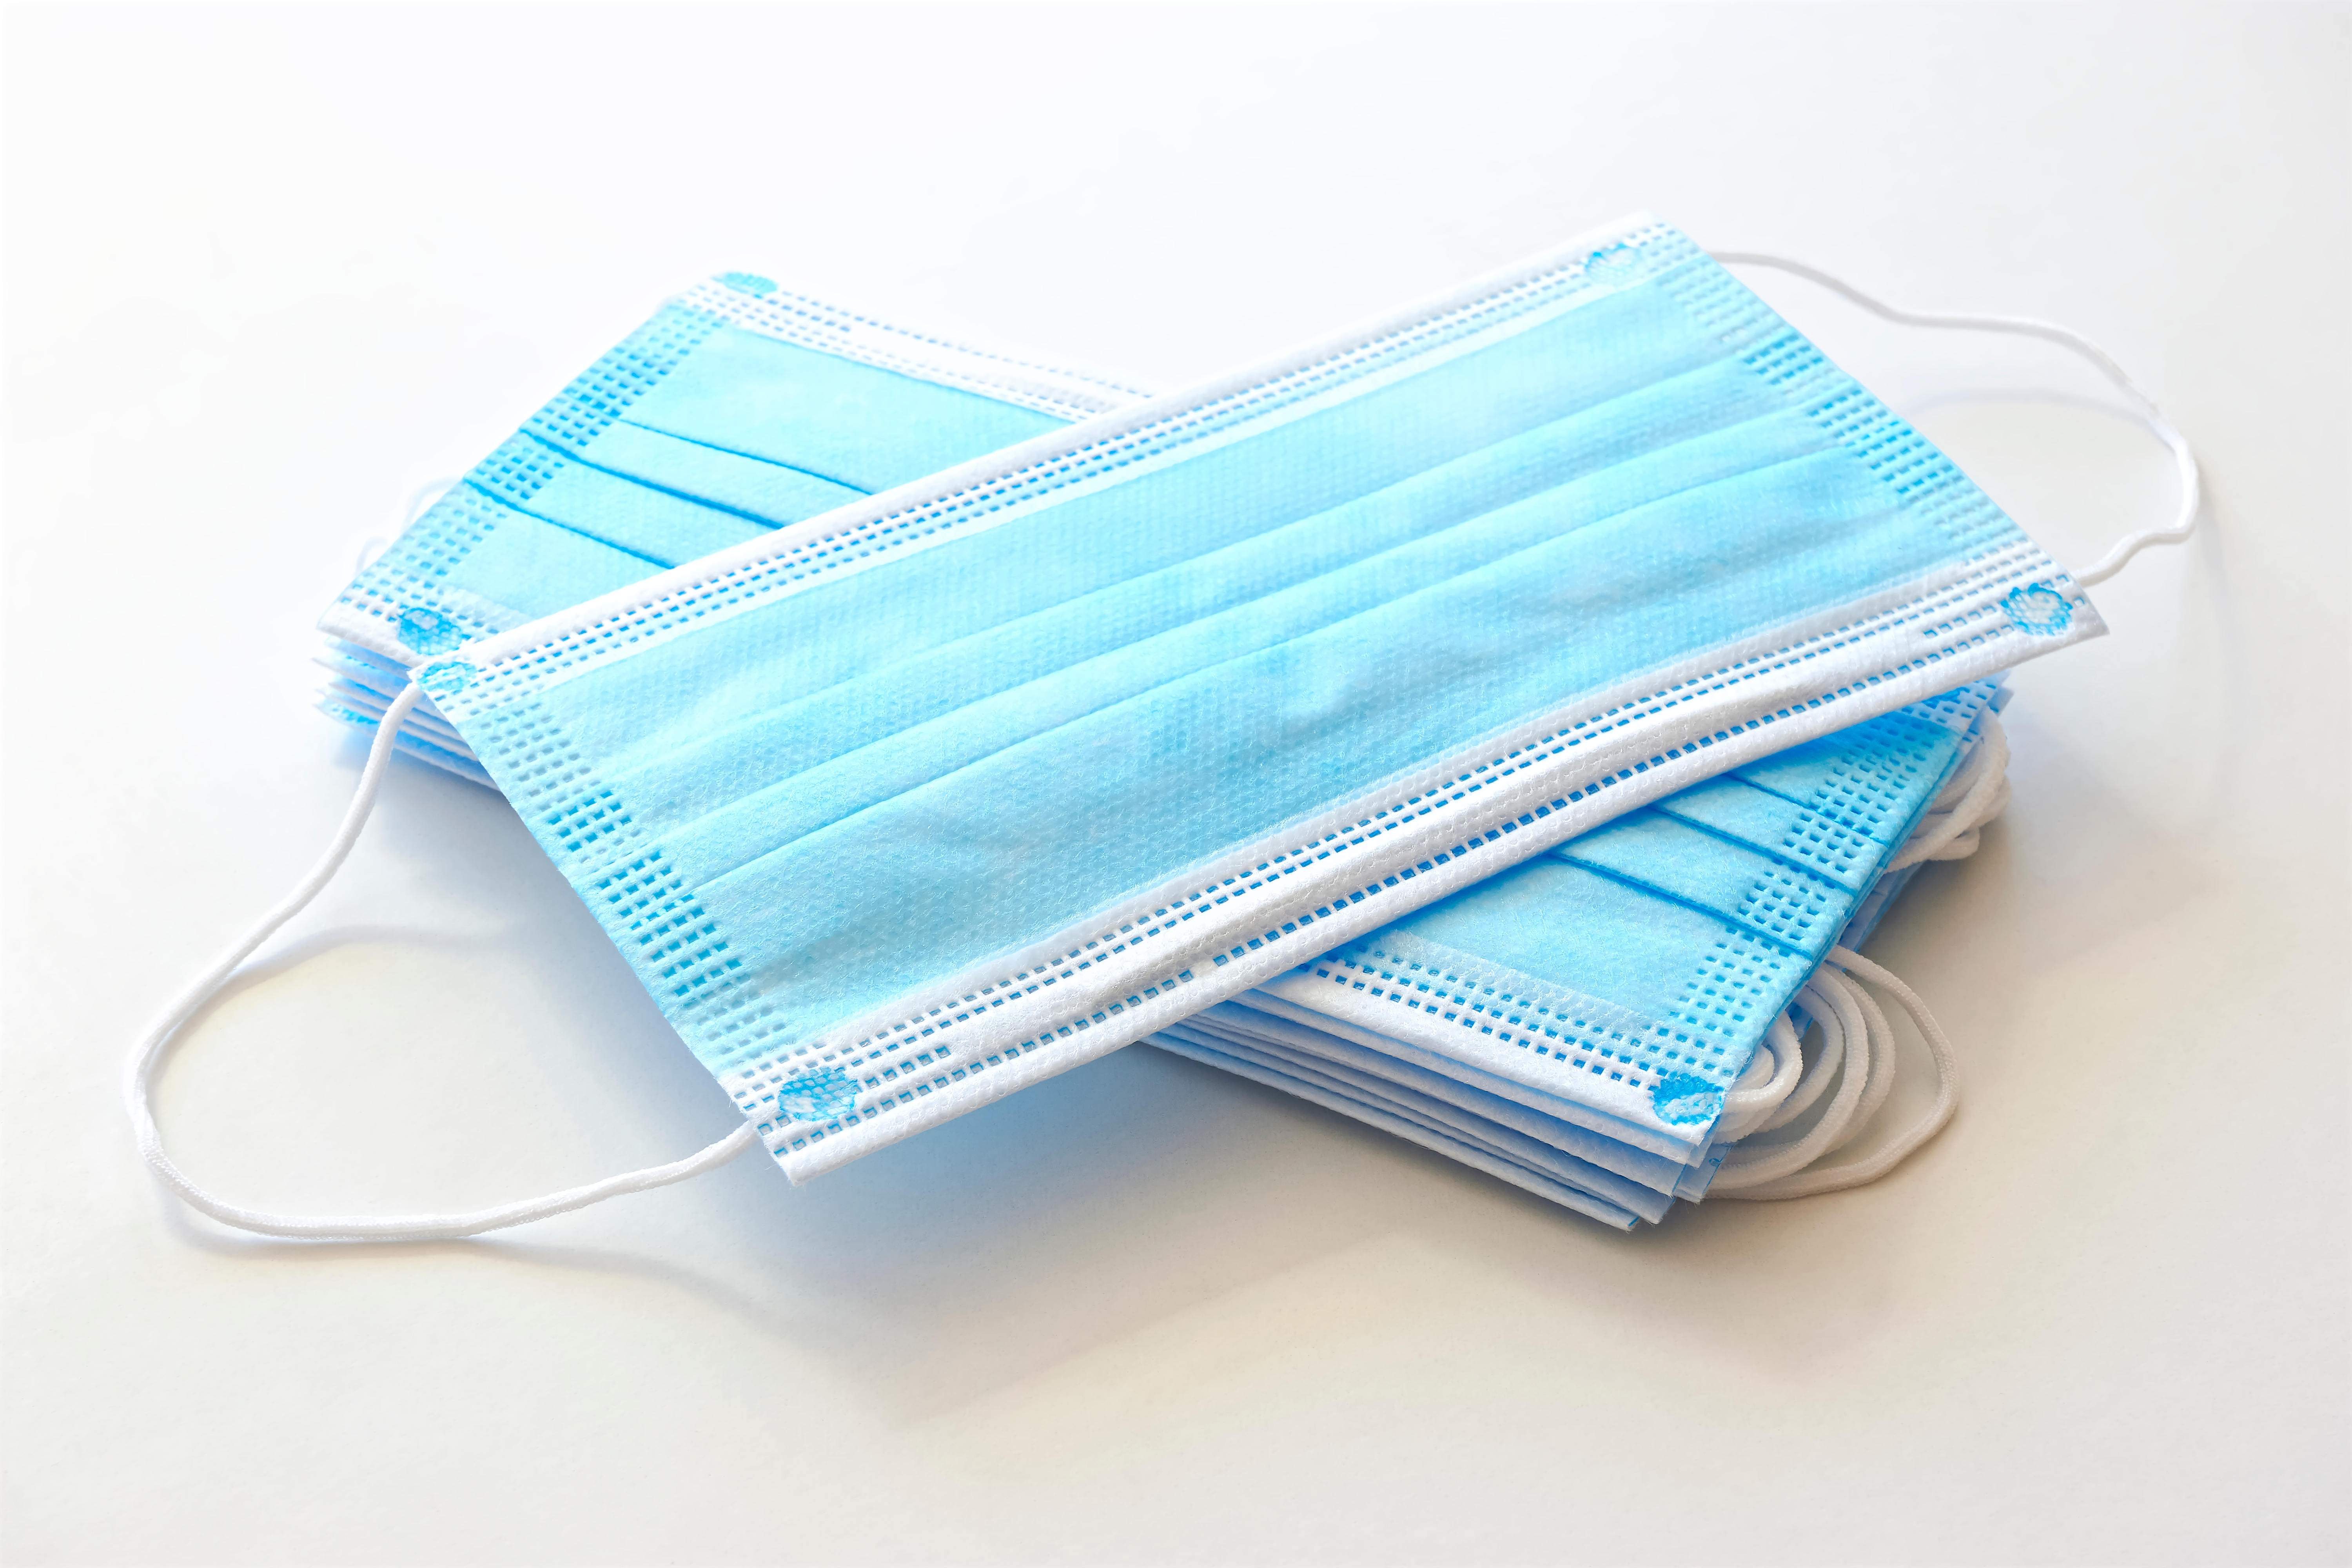 Two piles of blue face coverings criss-cross against a white background.